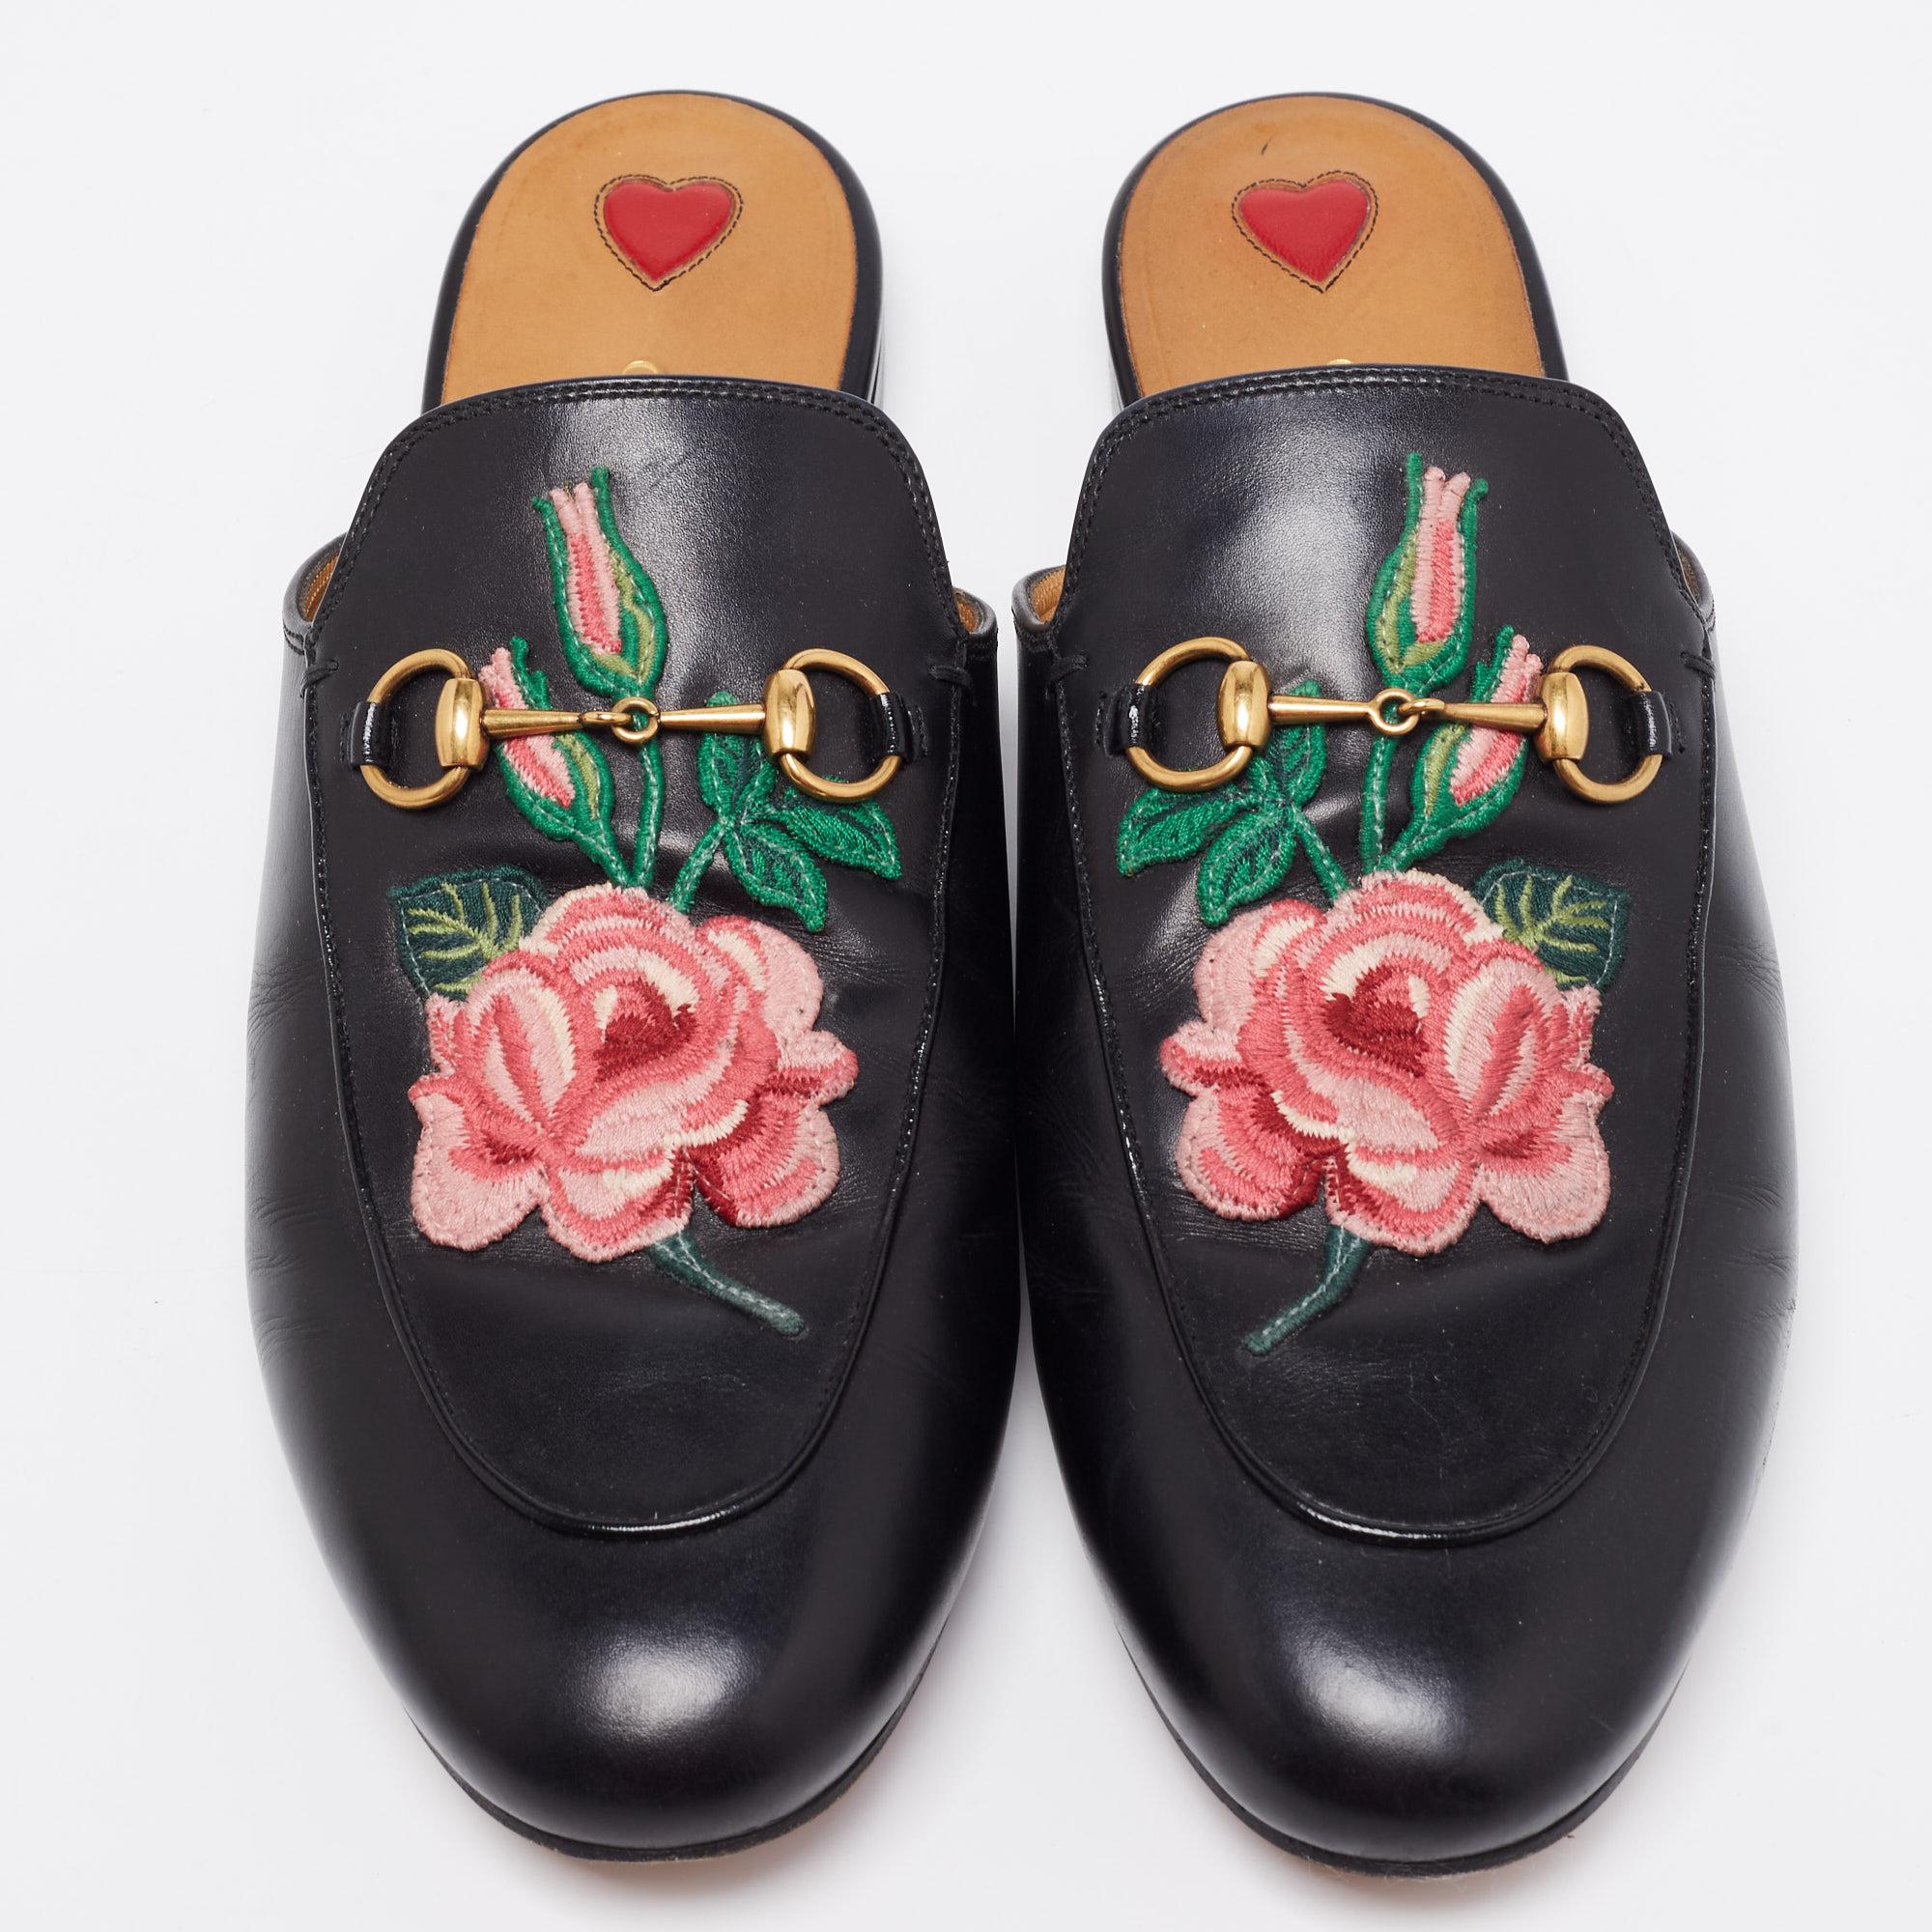 Gucci Black Floral Embroidered Leather Princetown Mules Size 41.5 1